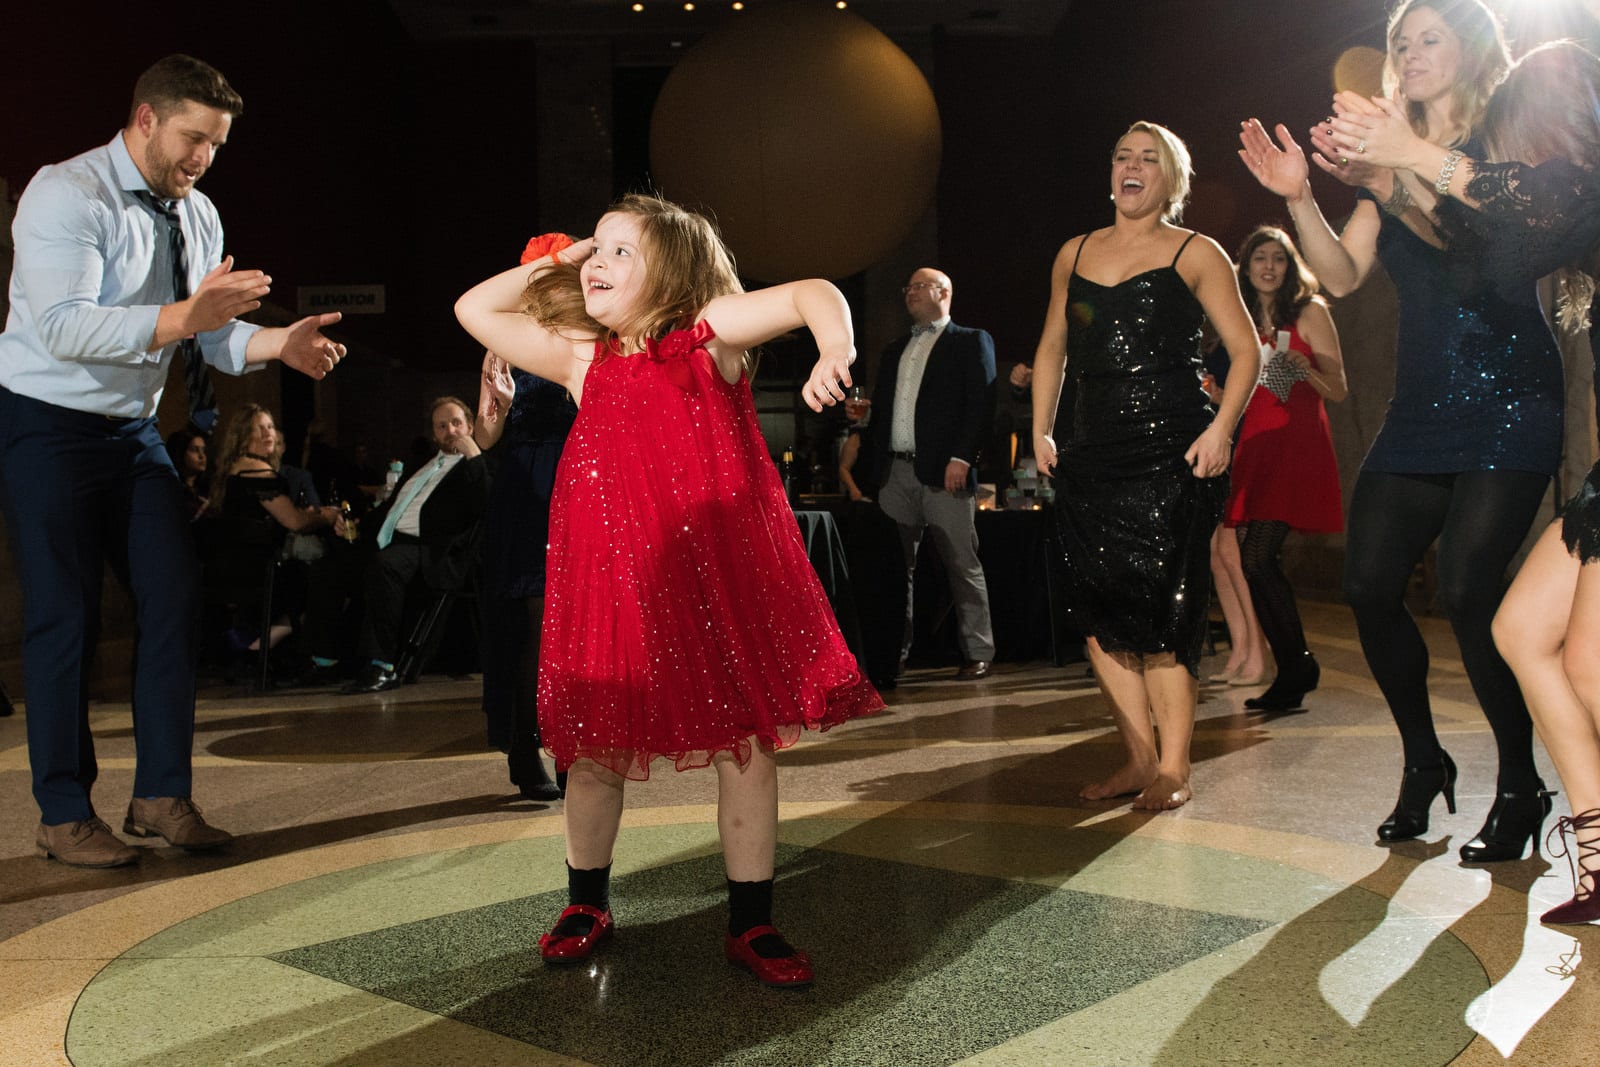 A little girl in a red dress dances as adults around her clap their hands during a wedding at the Pittsburgh Children's Museum.